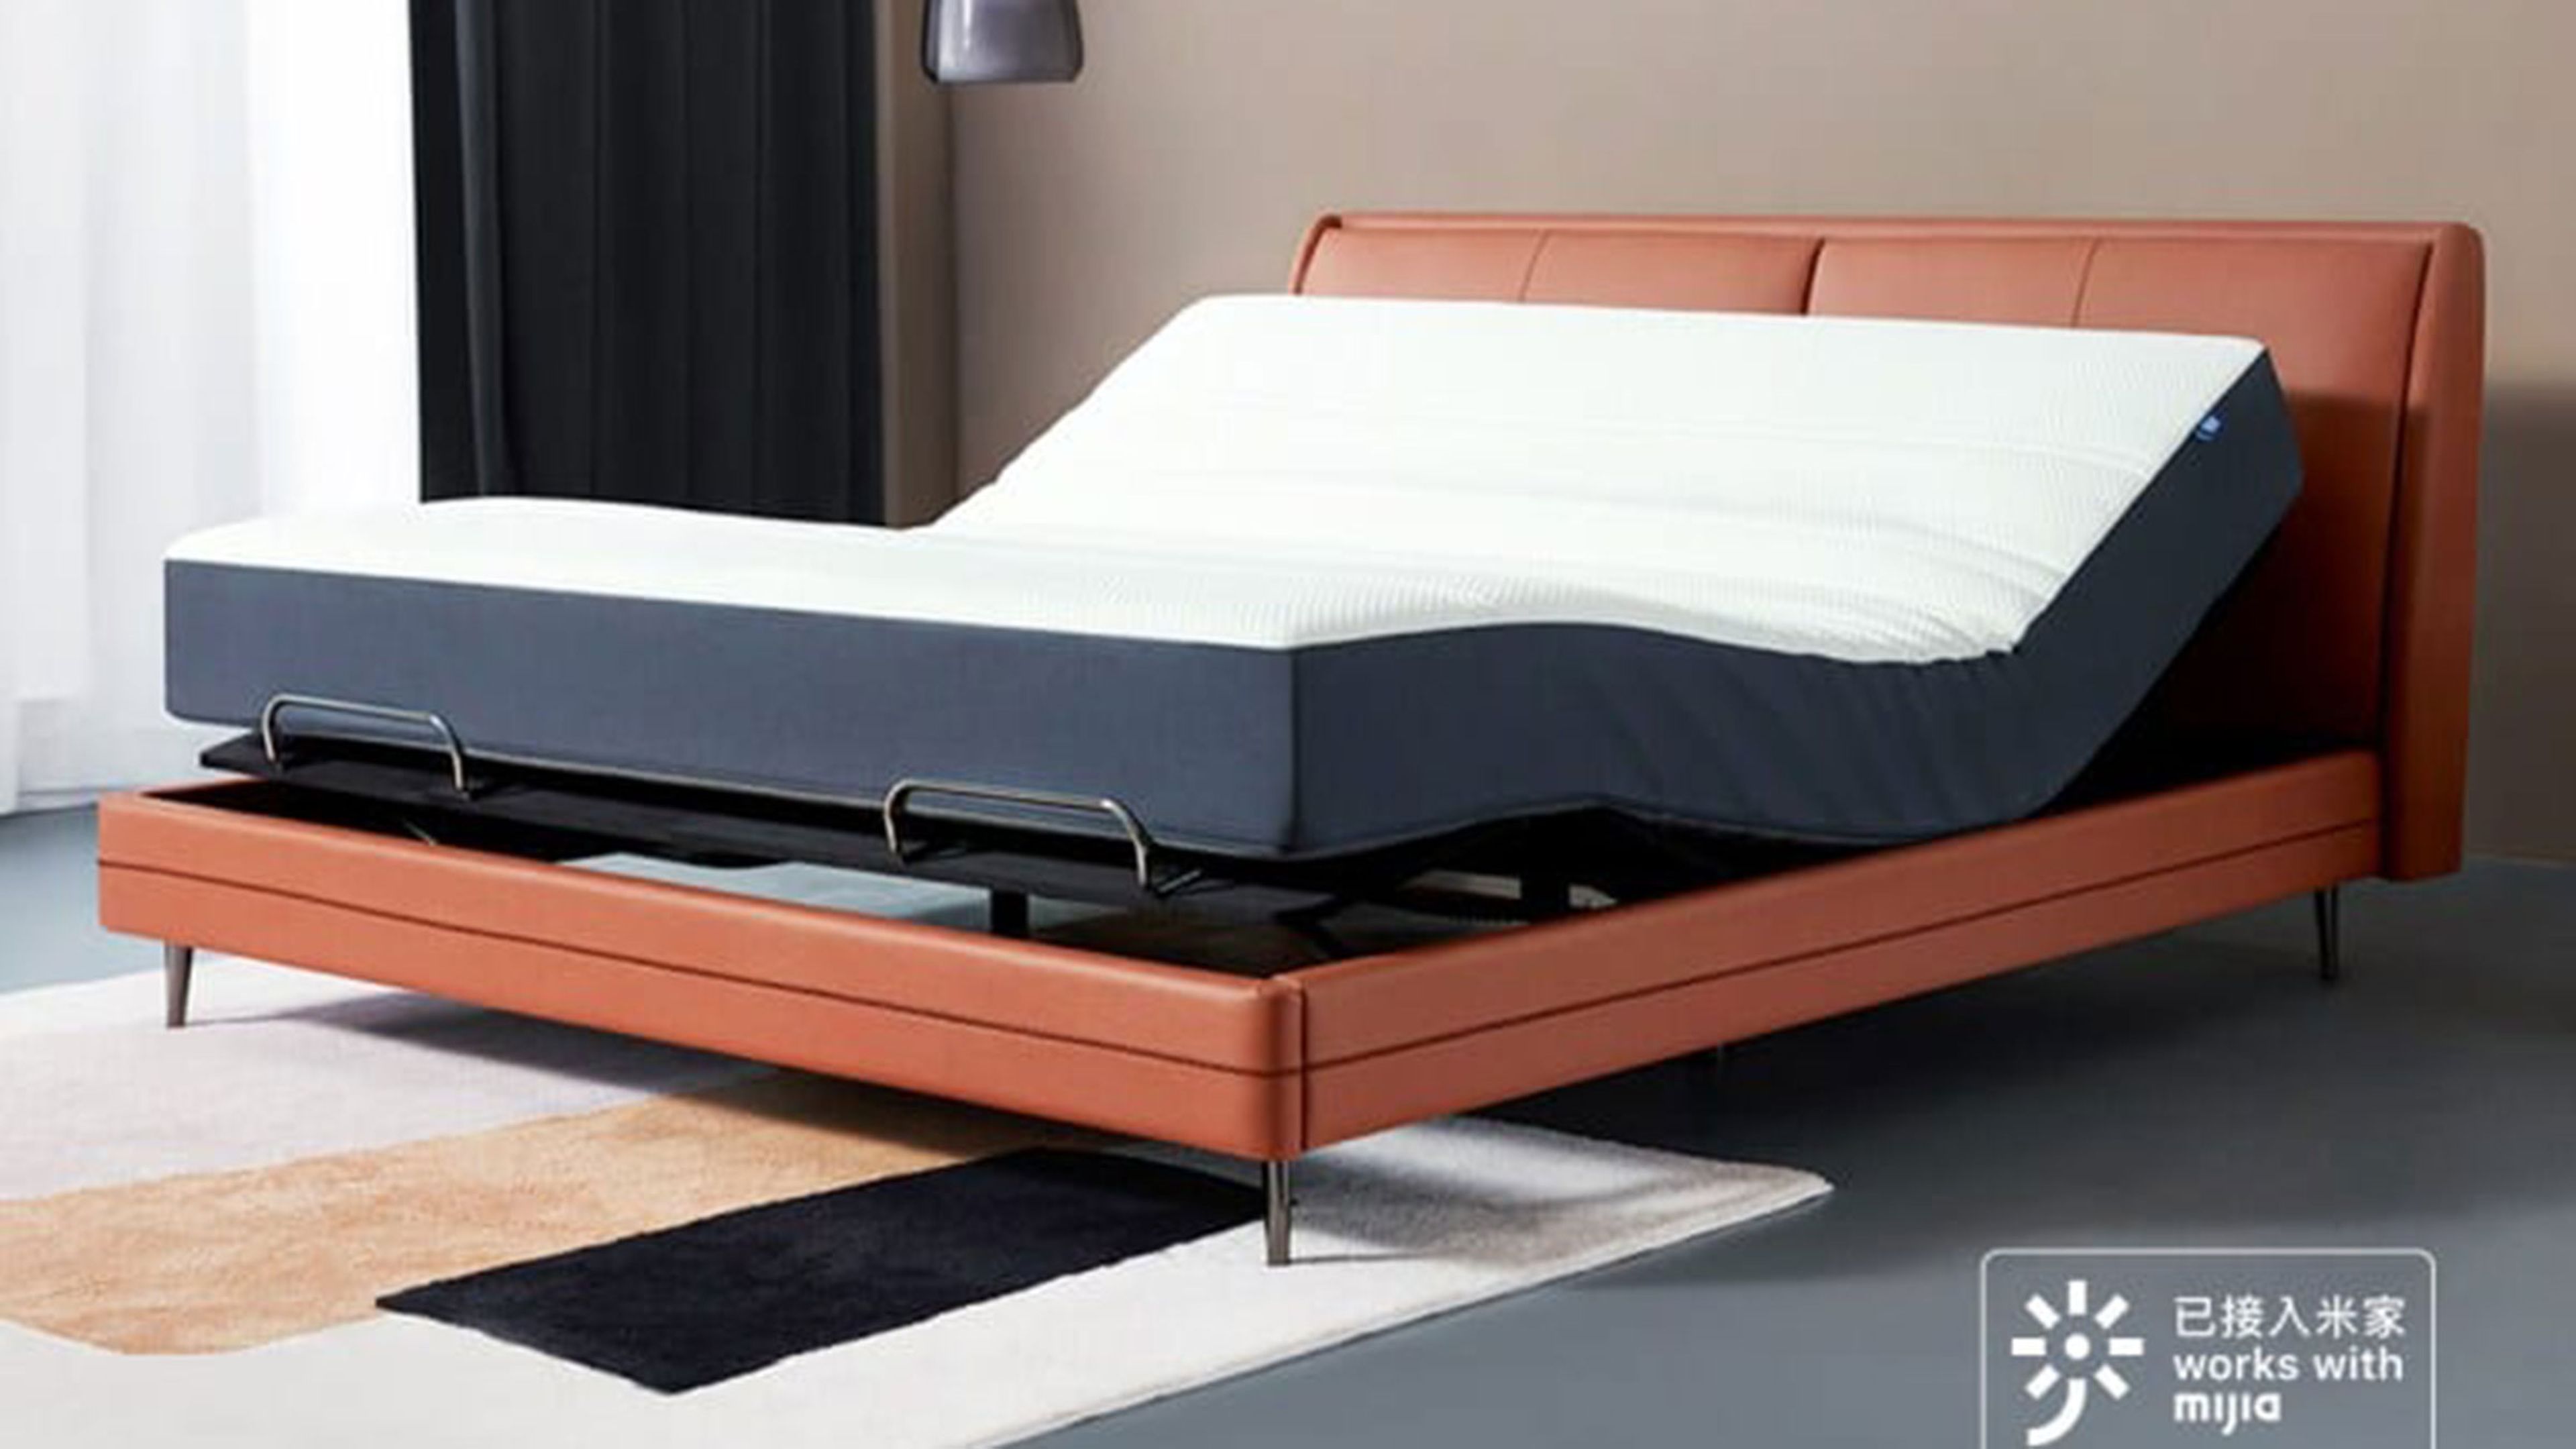 Xiaomi Smart Electric Bed Pro